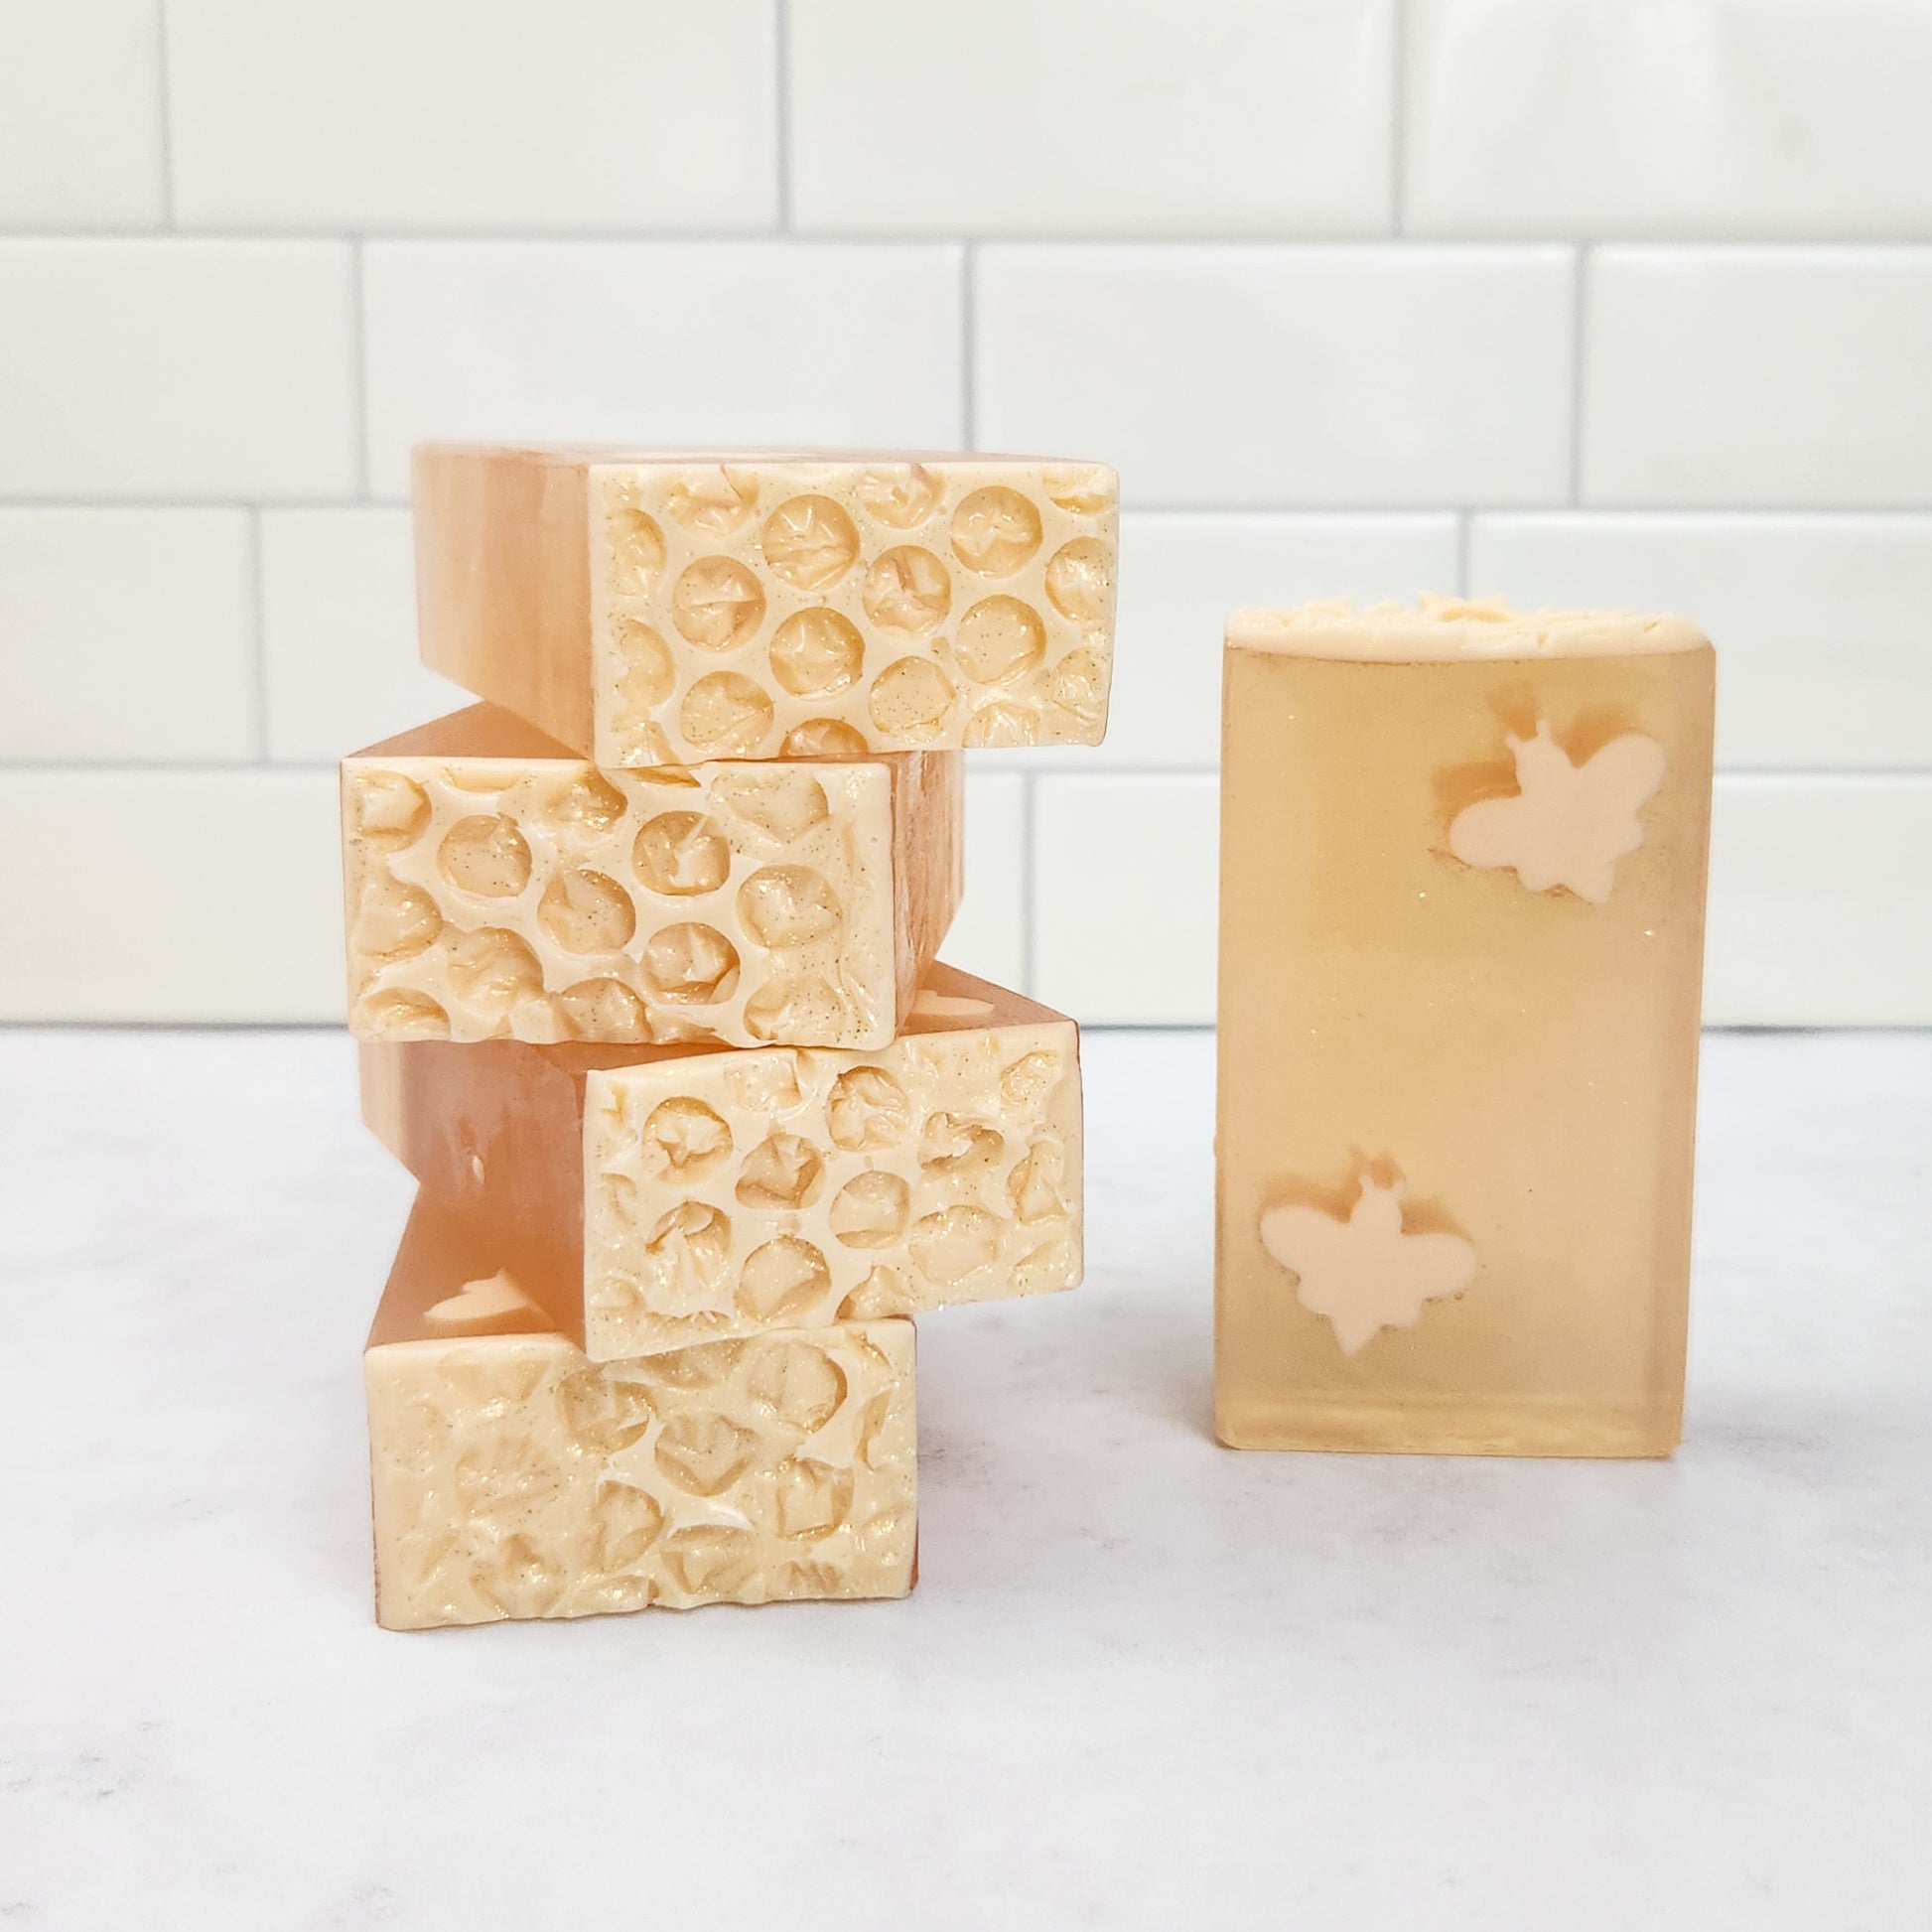 bars of honey-colored soaps featuring creamy colored bees in diagonal corners of each bar. The tops of the bars look like creamy colored honeycomb.